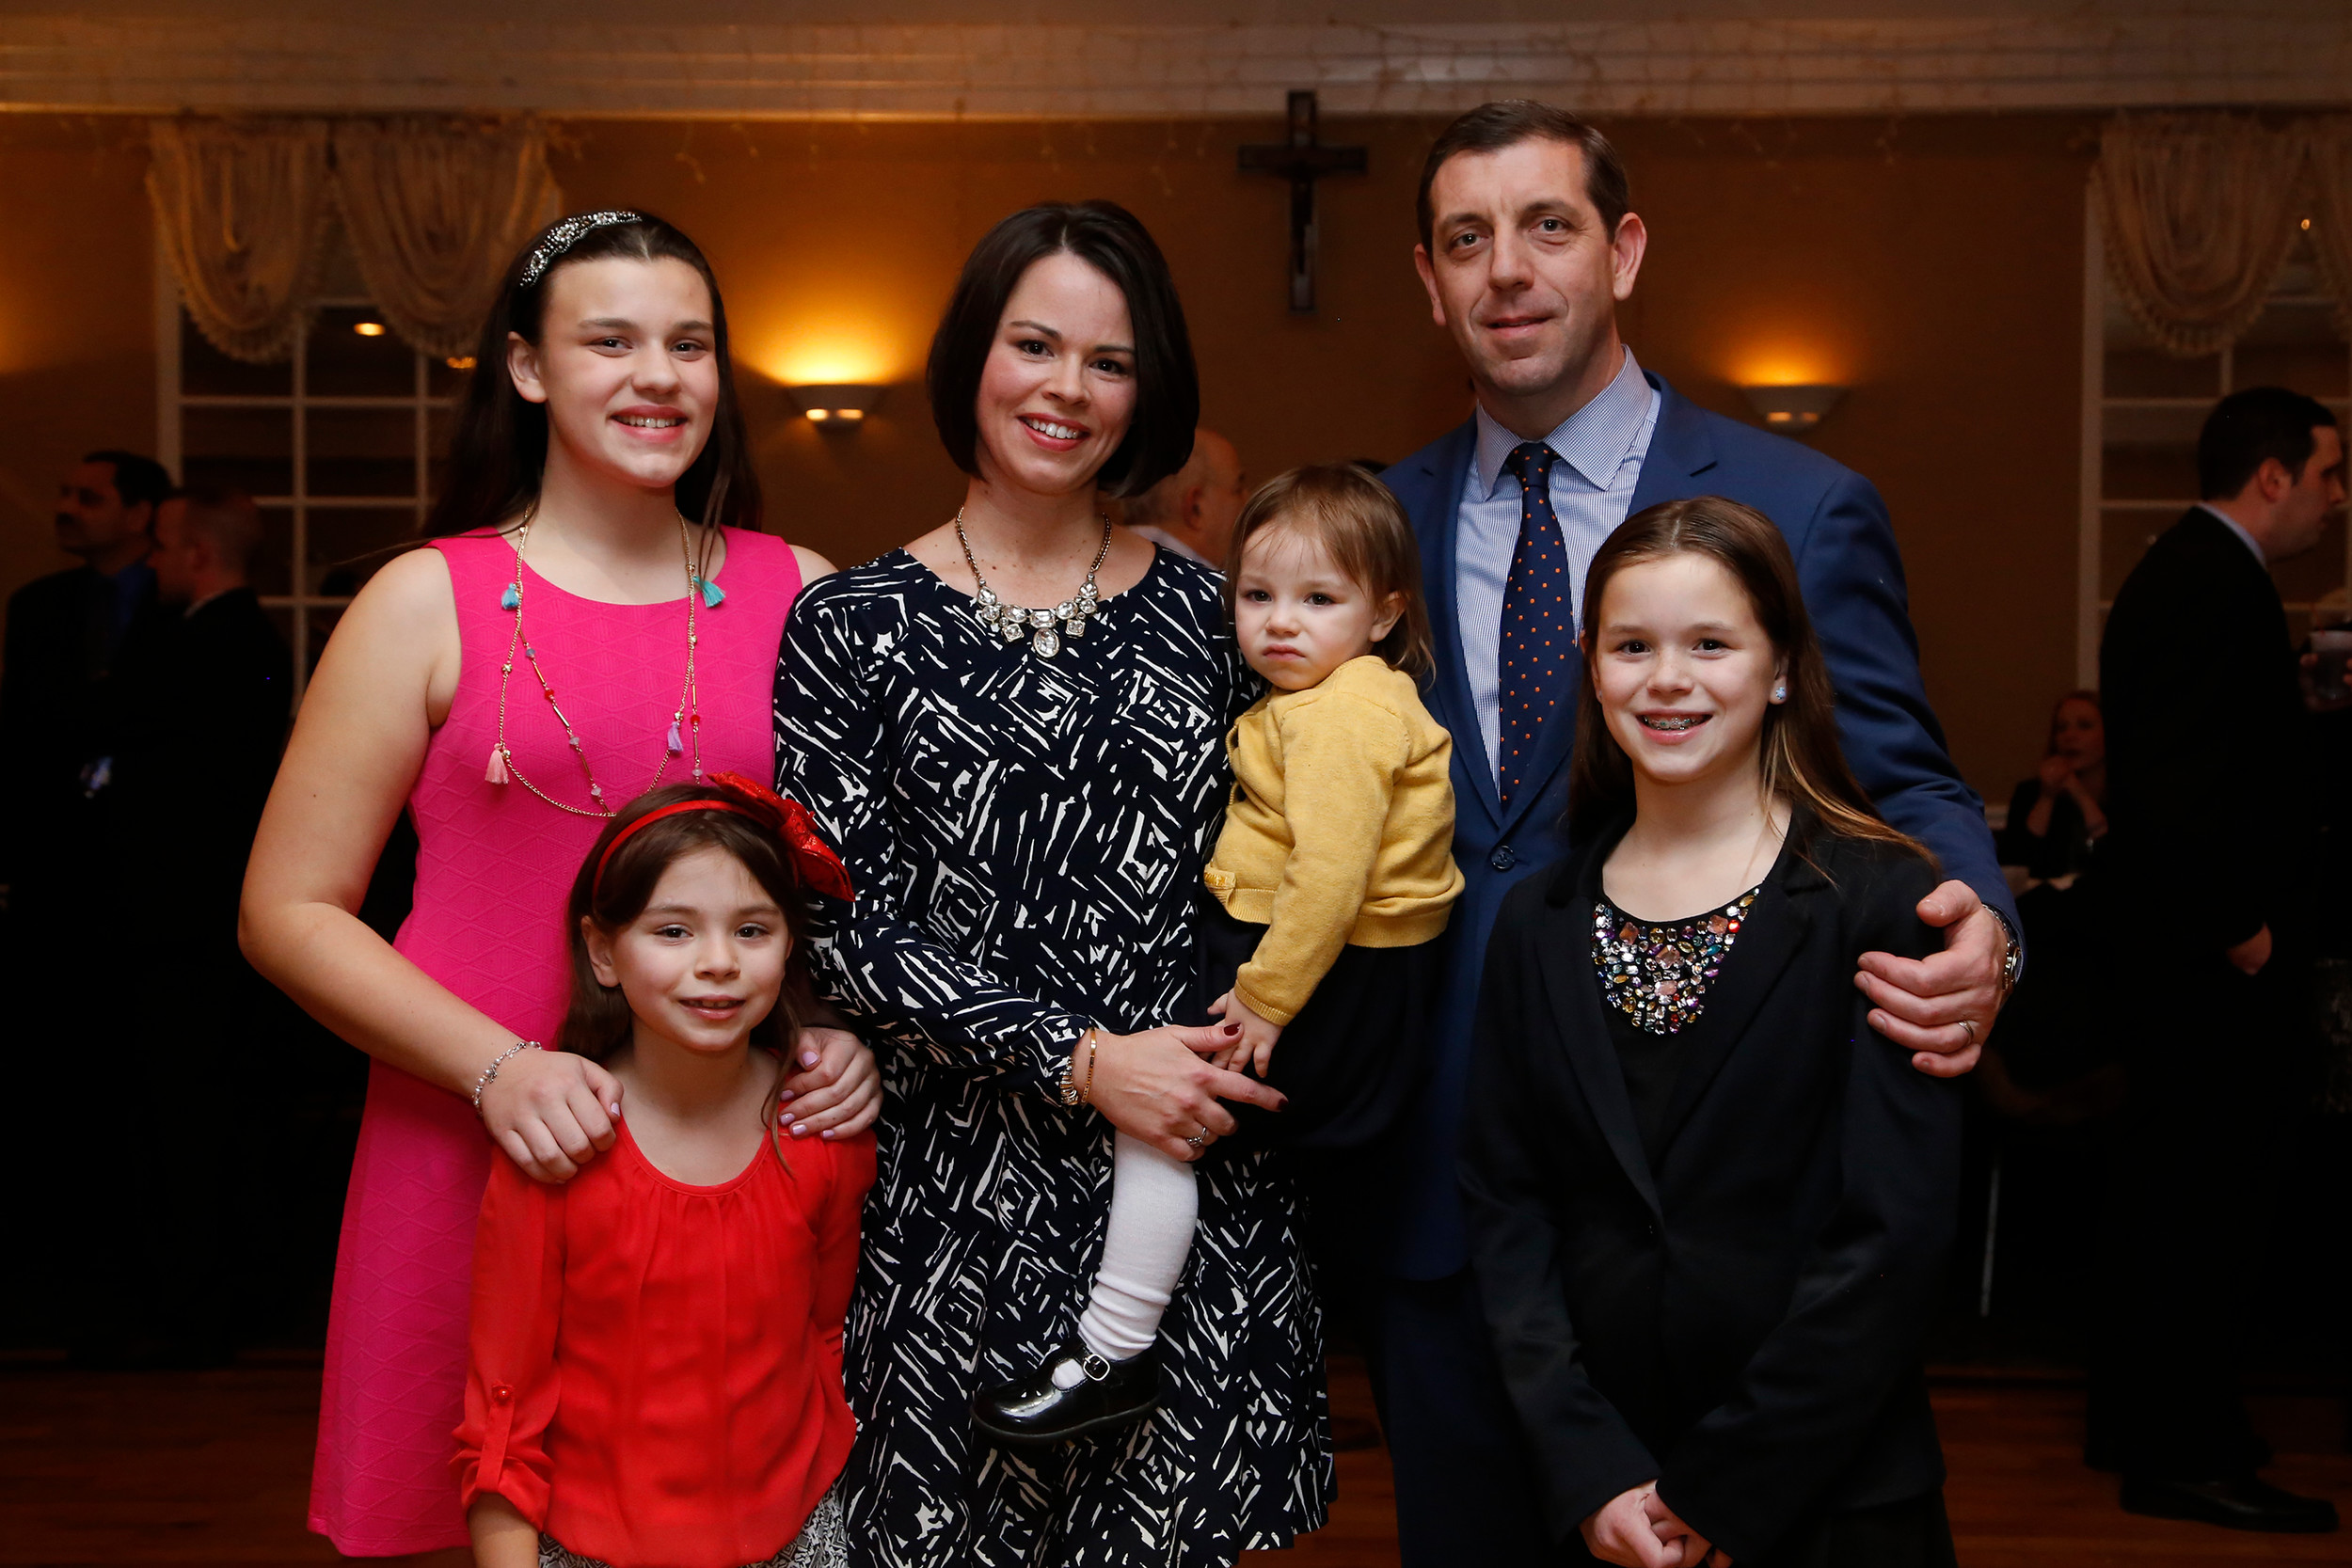 Susan Kelly, center, was awarded Citizen of the Year and enjoyed the honor with her husband, Alan, and children Elaine, Erin, Colleen and Cara.